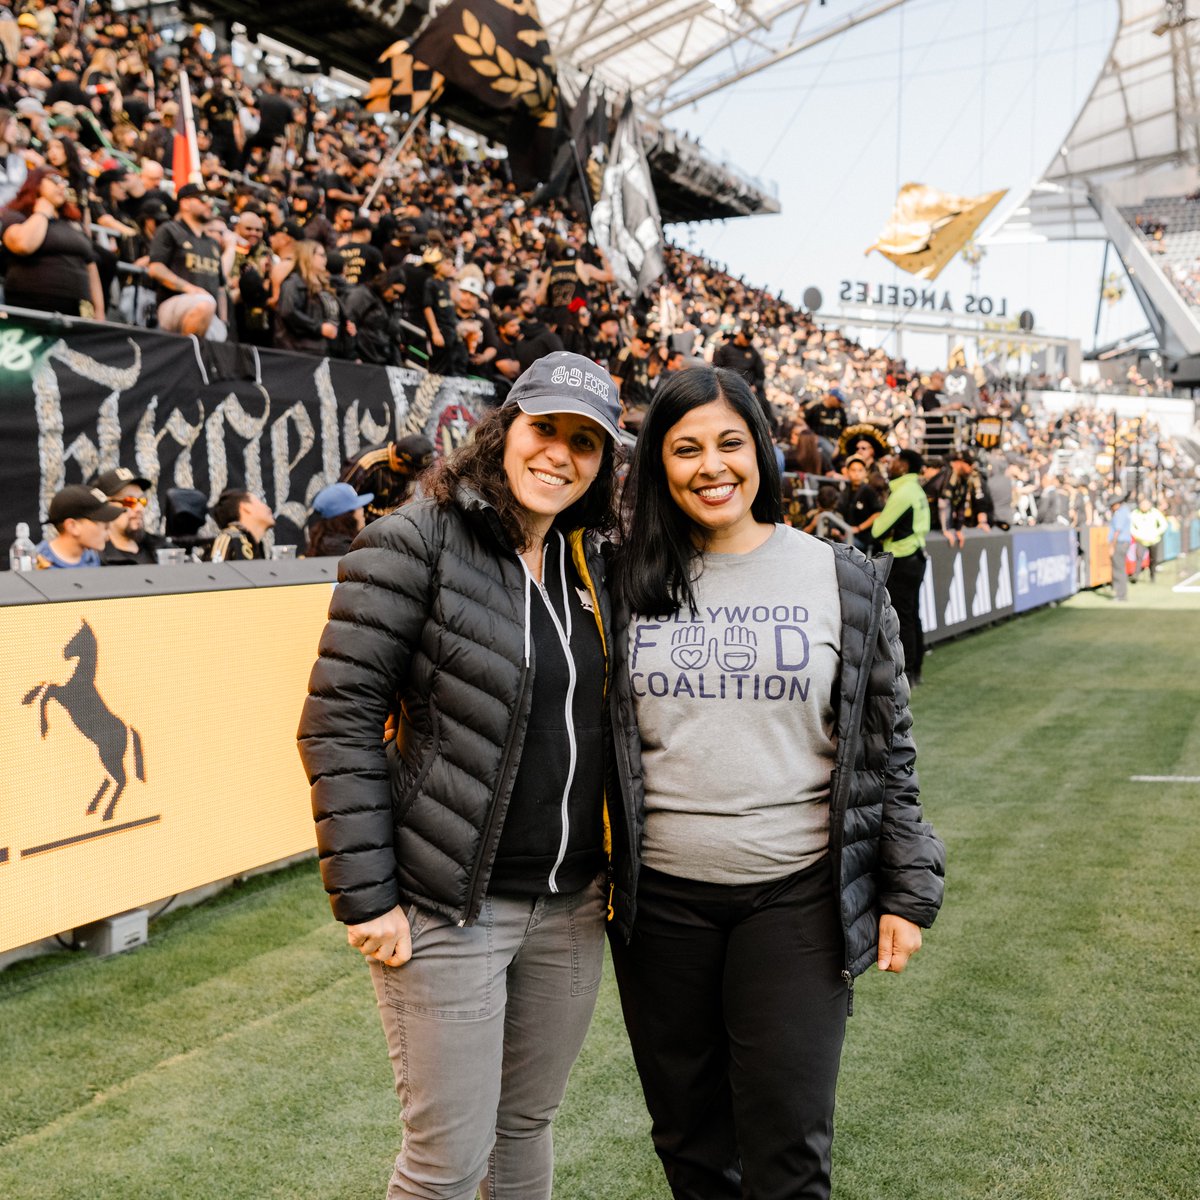 This week, we honor @HollywoodFoodCo The organization rescues over 49,000 pounds of food weekly and prepares nightly meals for the food insecure. Since its founding in 1987, the organization has not missed a single night of meal service. #LAFC Community Spotlight |…